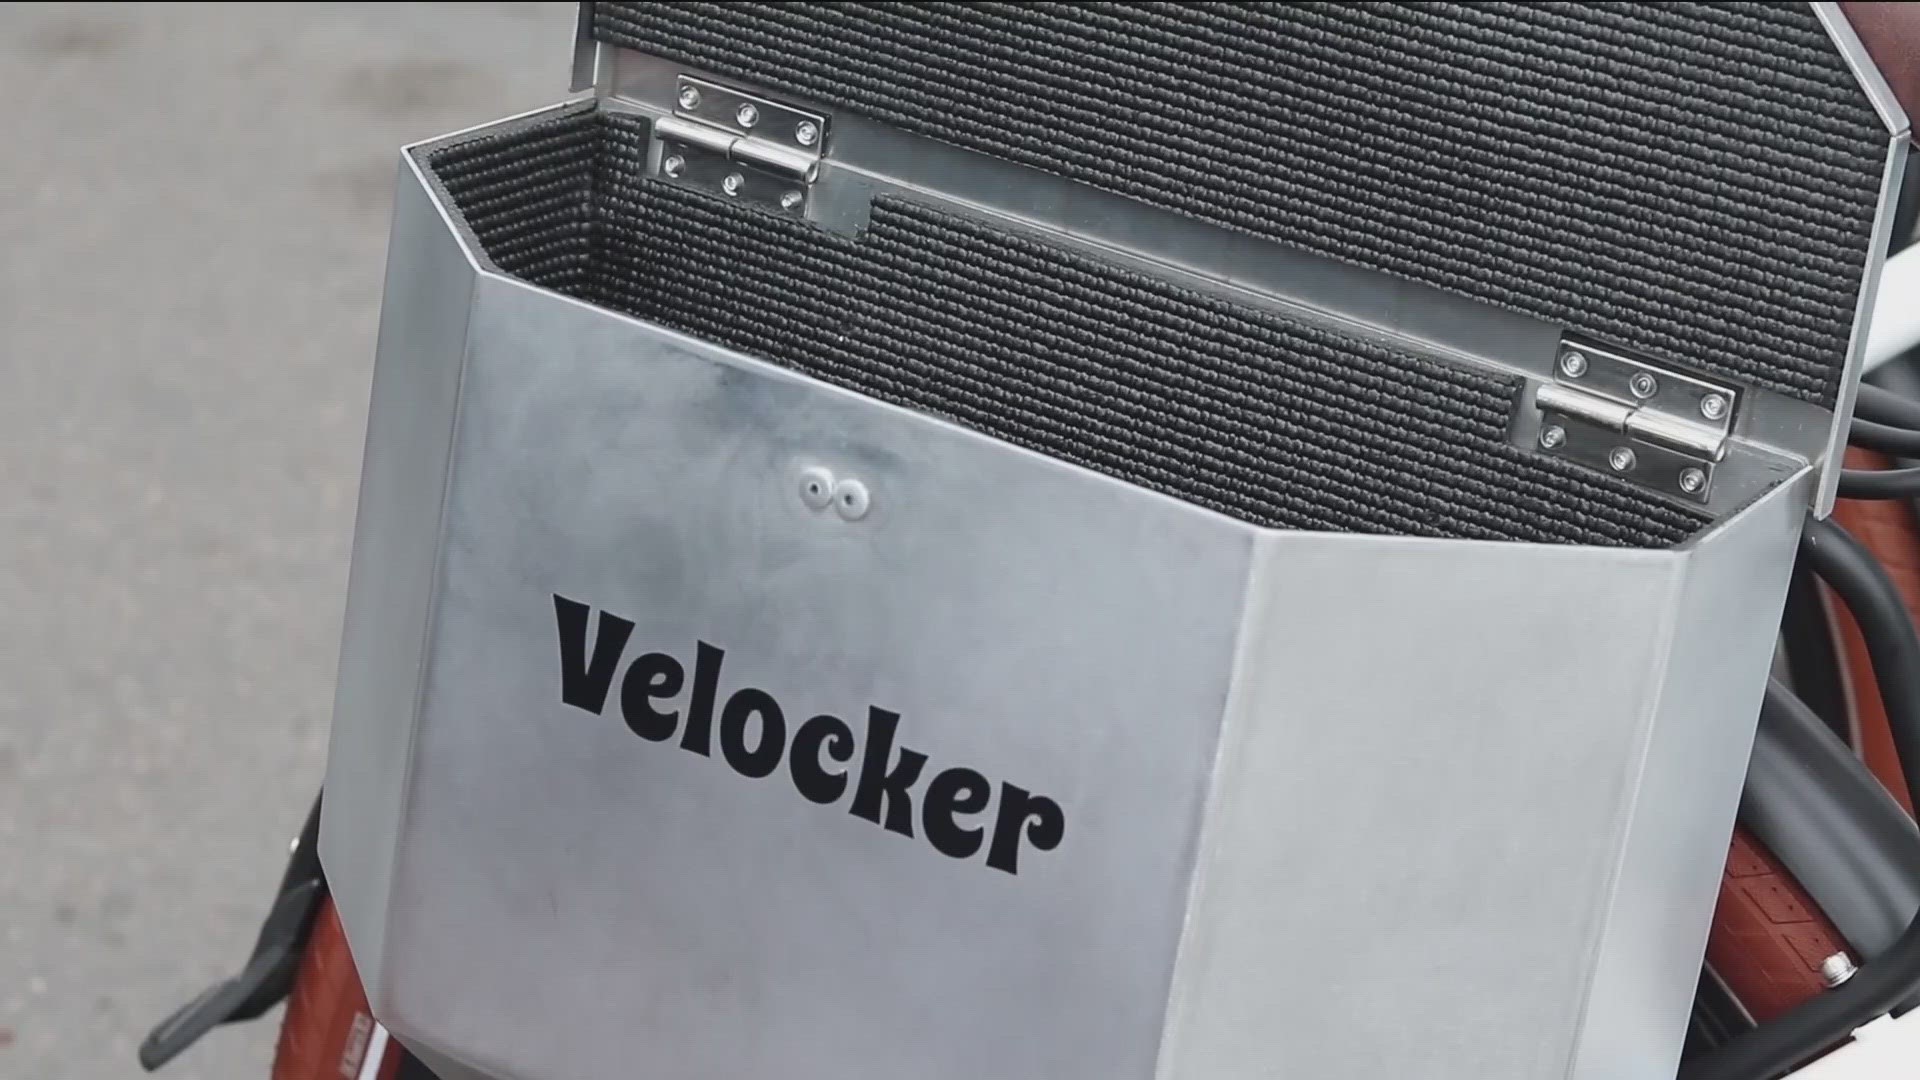 'Velocker' is a lightweight aluminum lockable box for cyclists on the go.